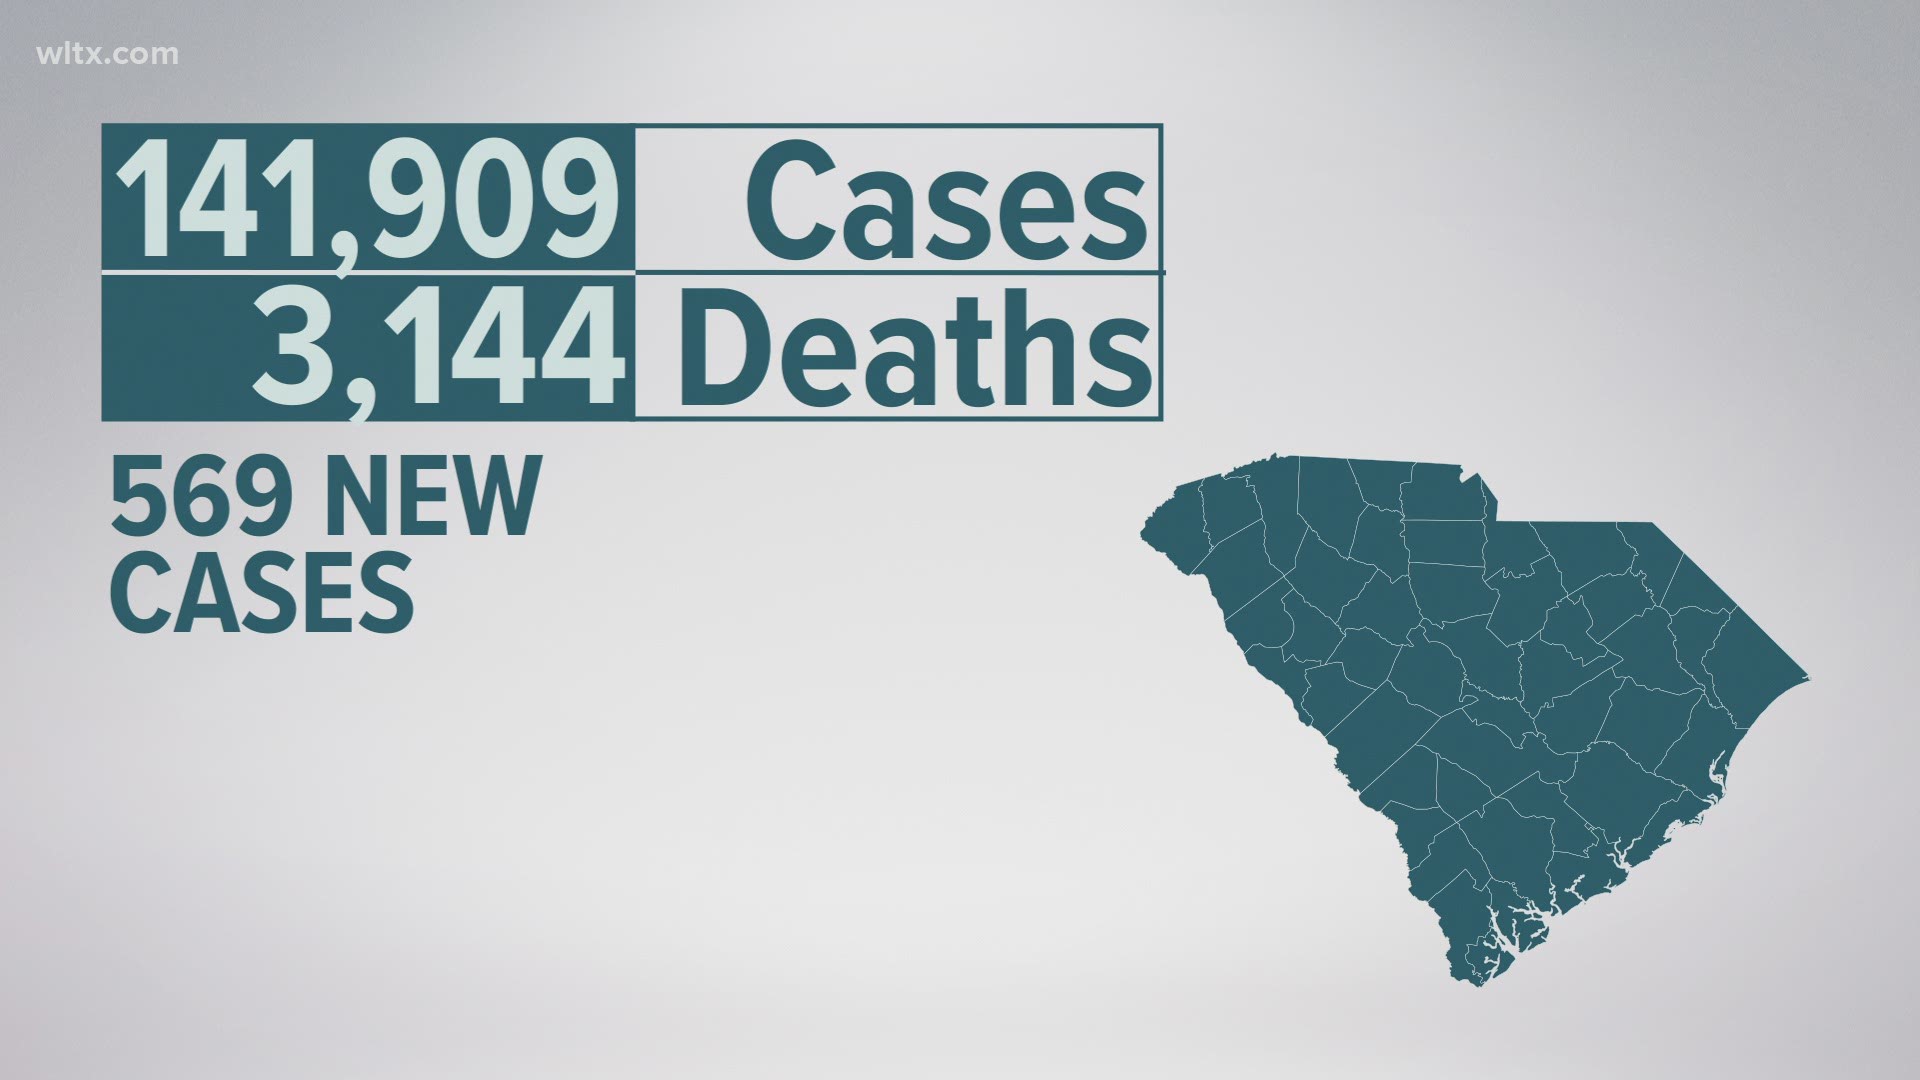 This brings the total number of confirmed cases to 141,909, probable cases to 3,978, confirmed deaths to 3,144, and 182 probable deaths